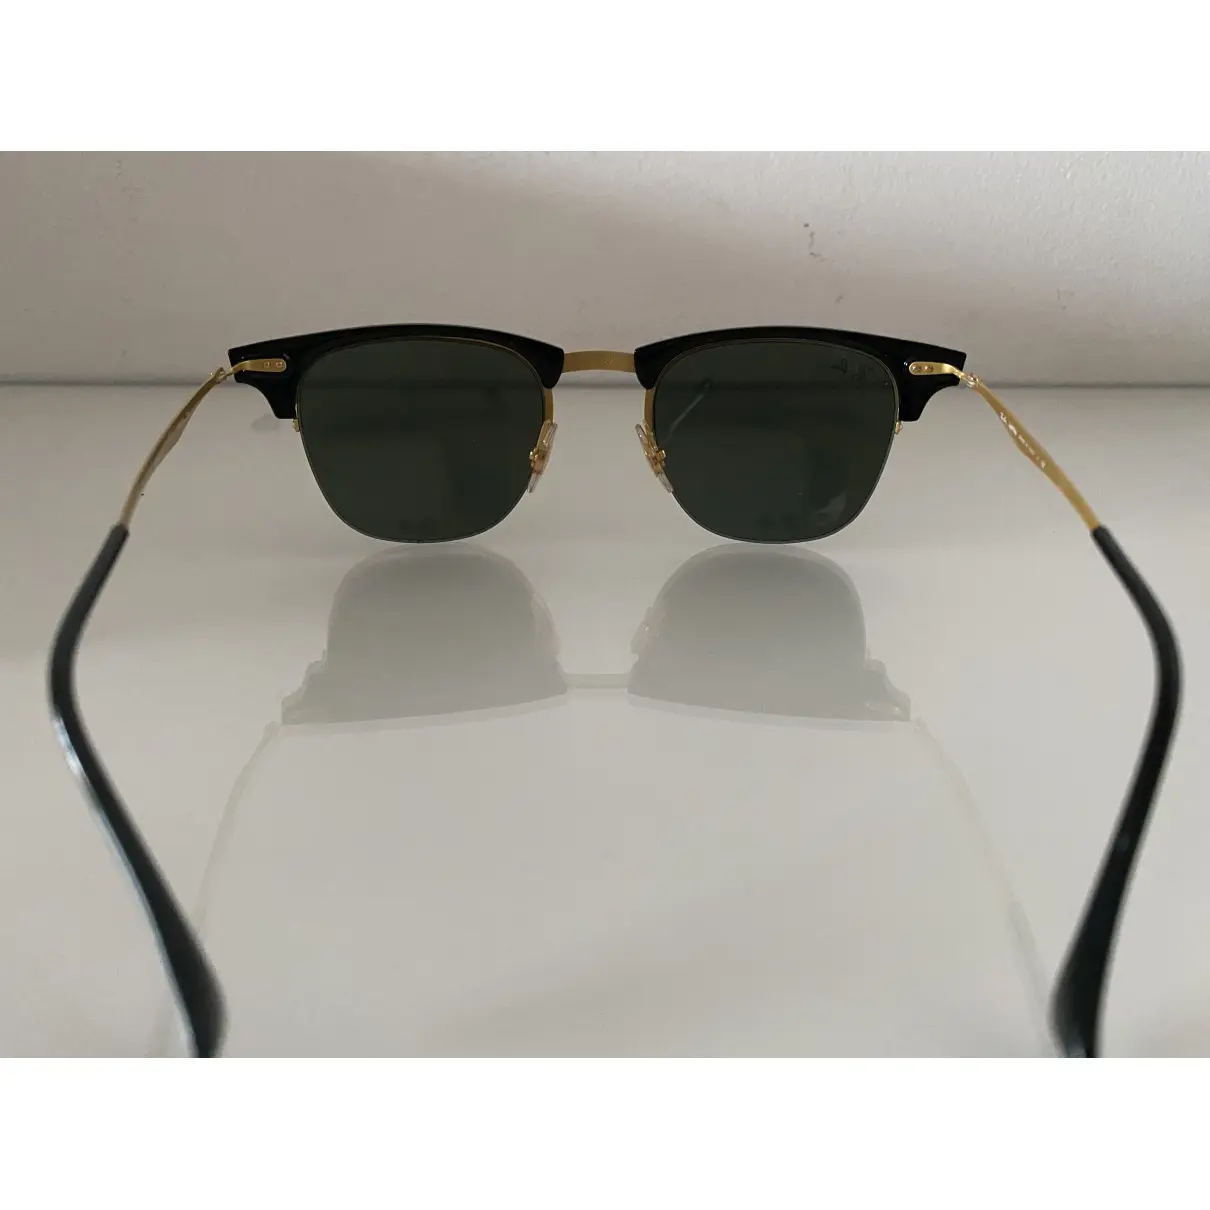 Ray-Ban Clubmaster sunglasses for sale